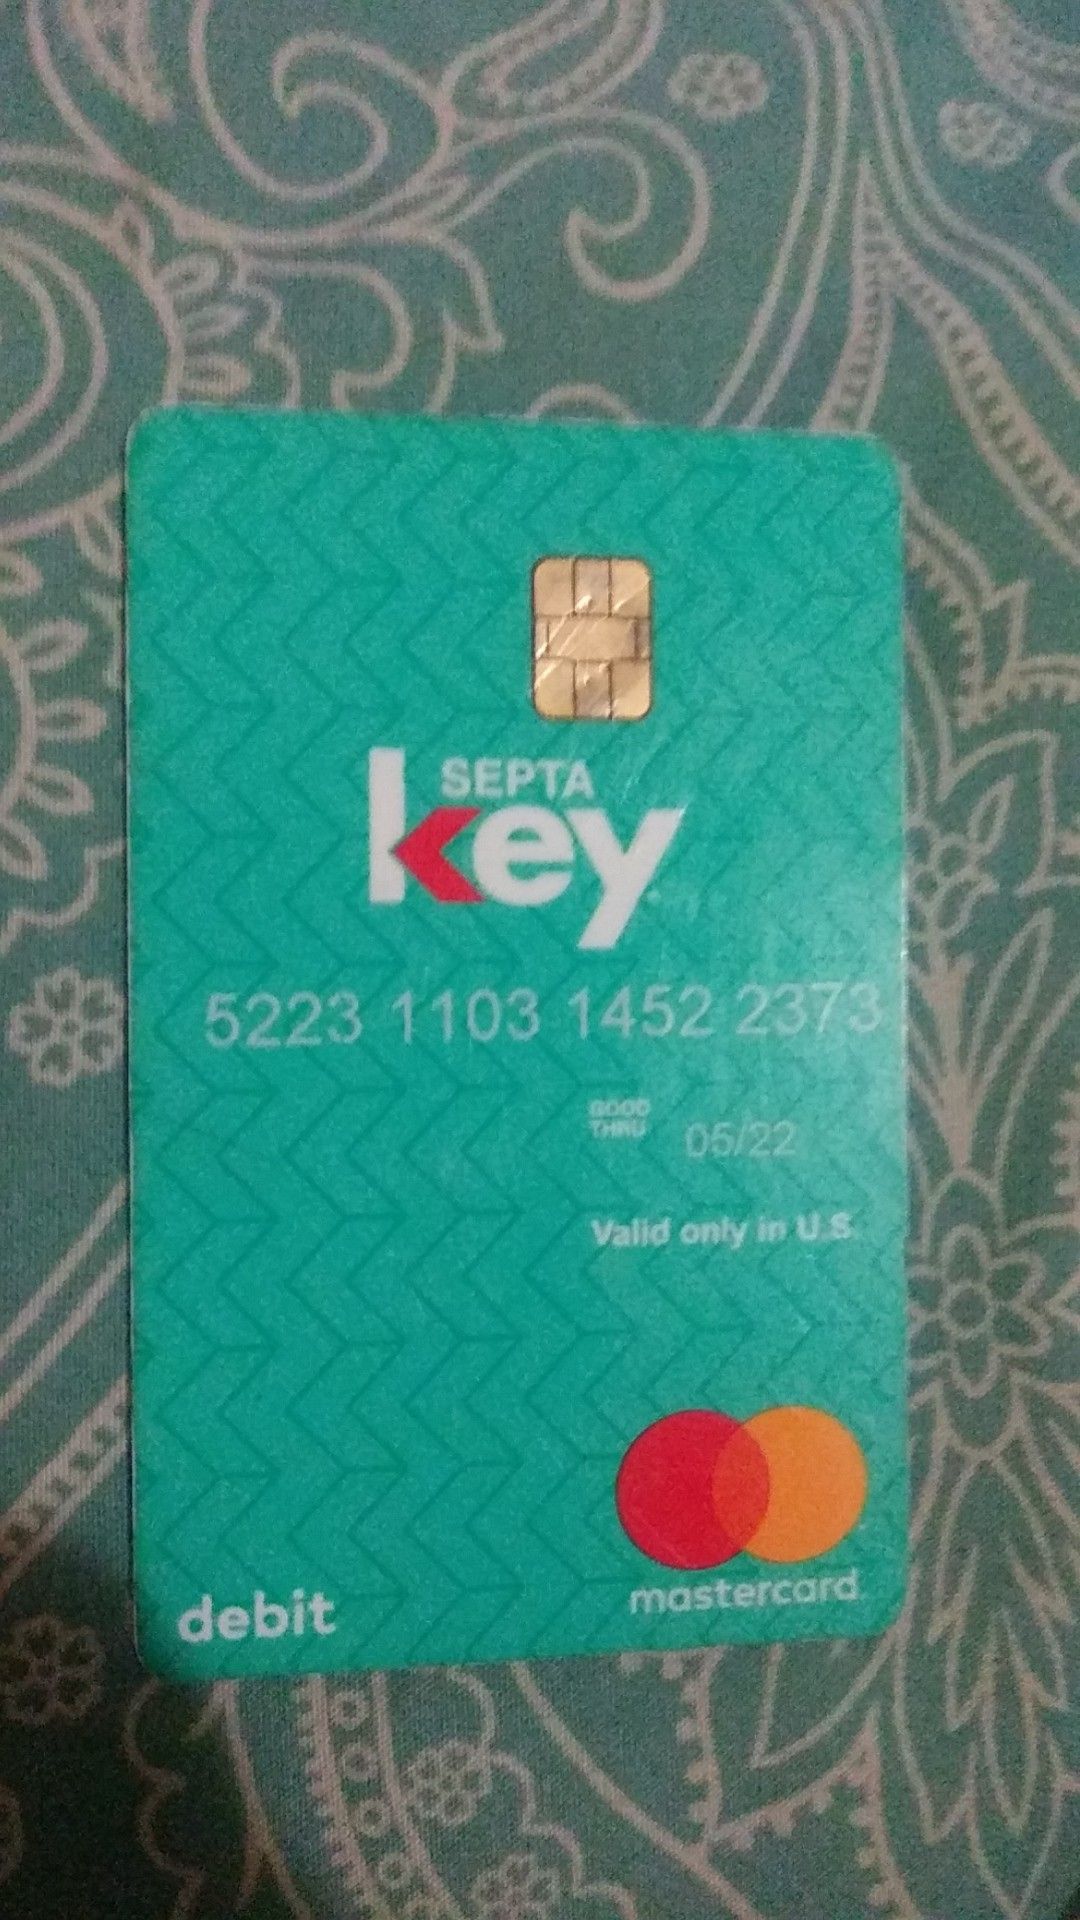 SEPTA key card with $45 on it